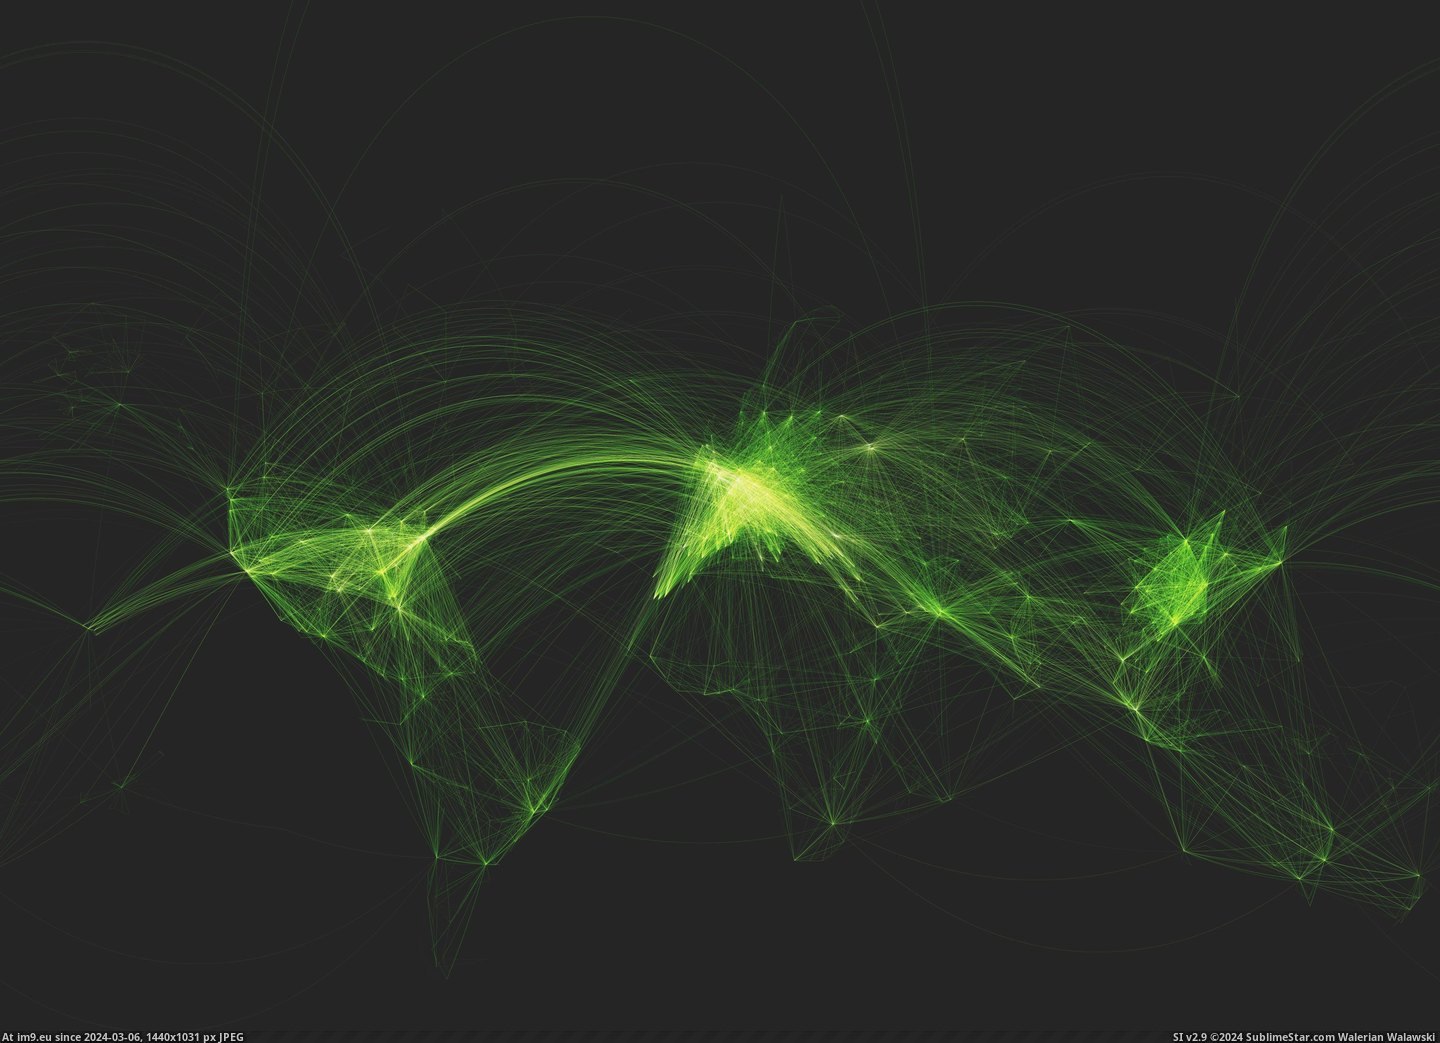 #Wallpaper #Beautiful #World #Web #Traffic #Routes #Map #Wide #Air [Mapporn] World-Wide Air Traffic Routes[4000x2875](Web-Map in comments) Pic. (Bild von album My r/MAPS favs))